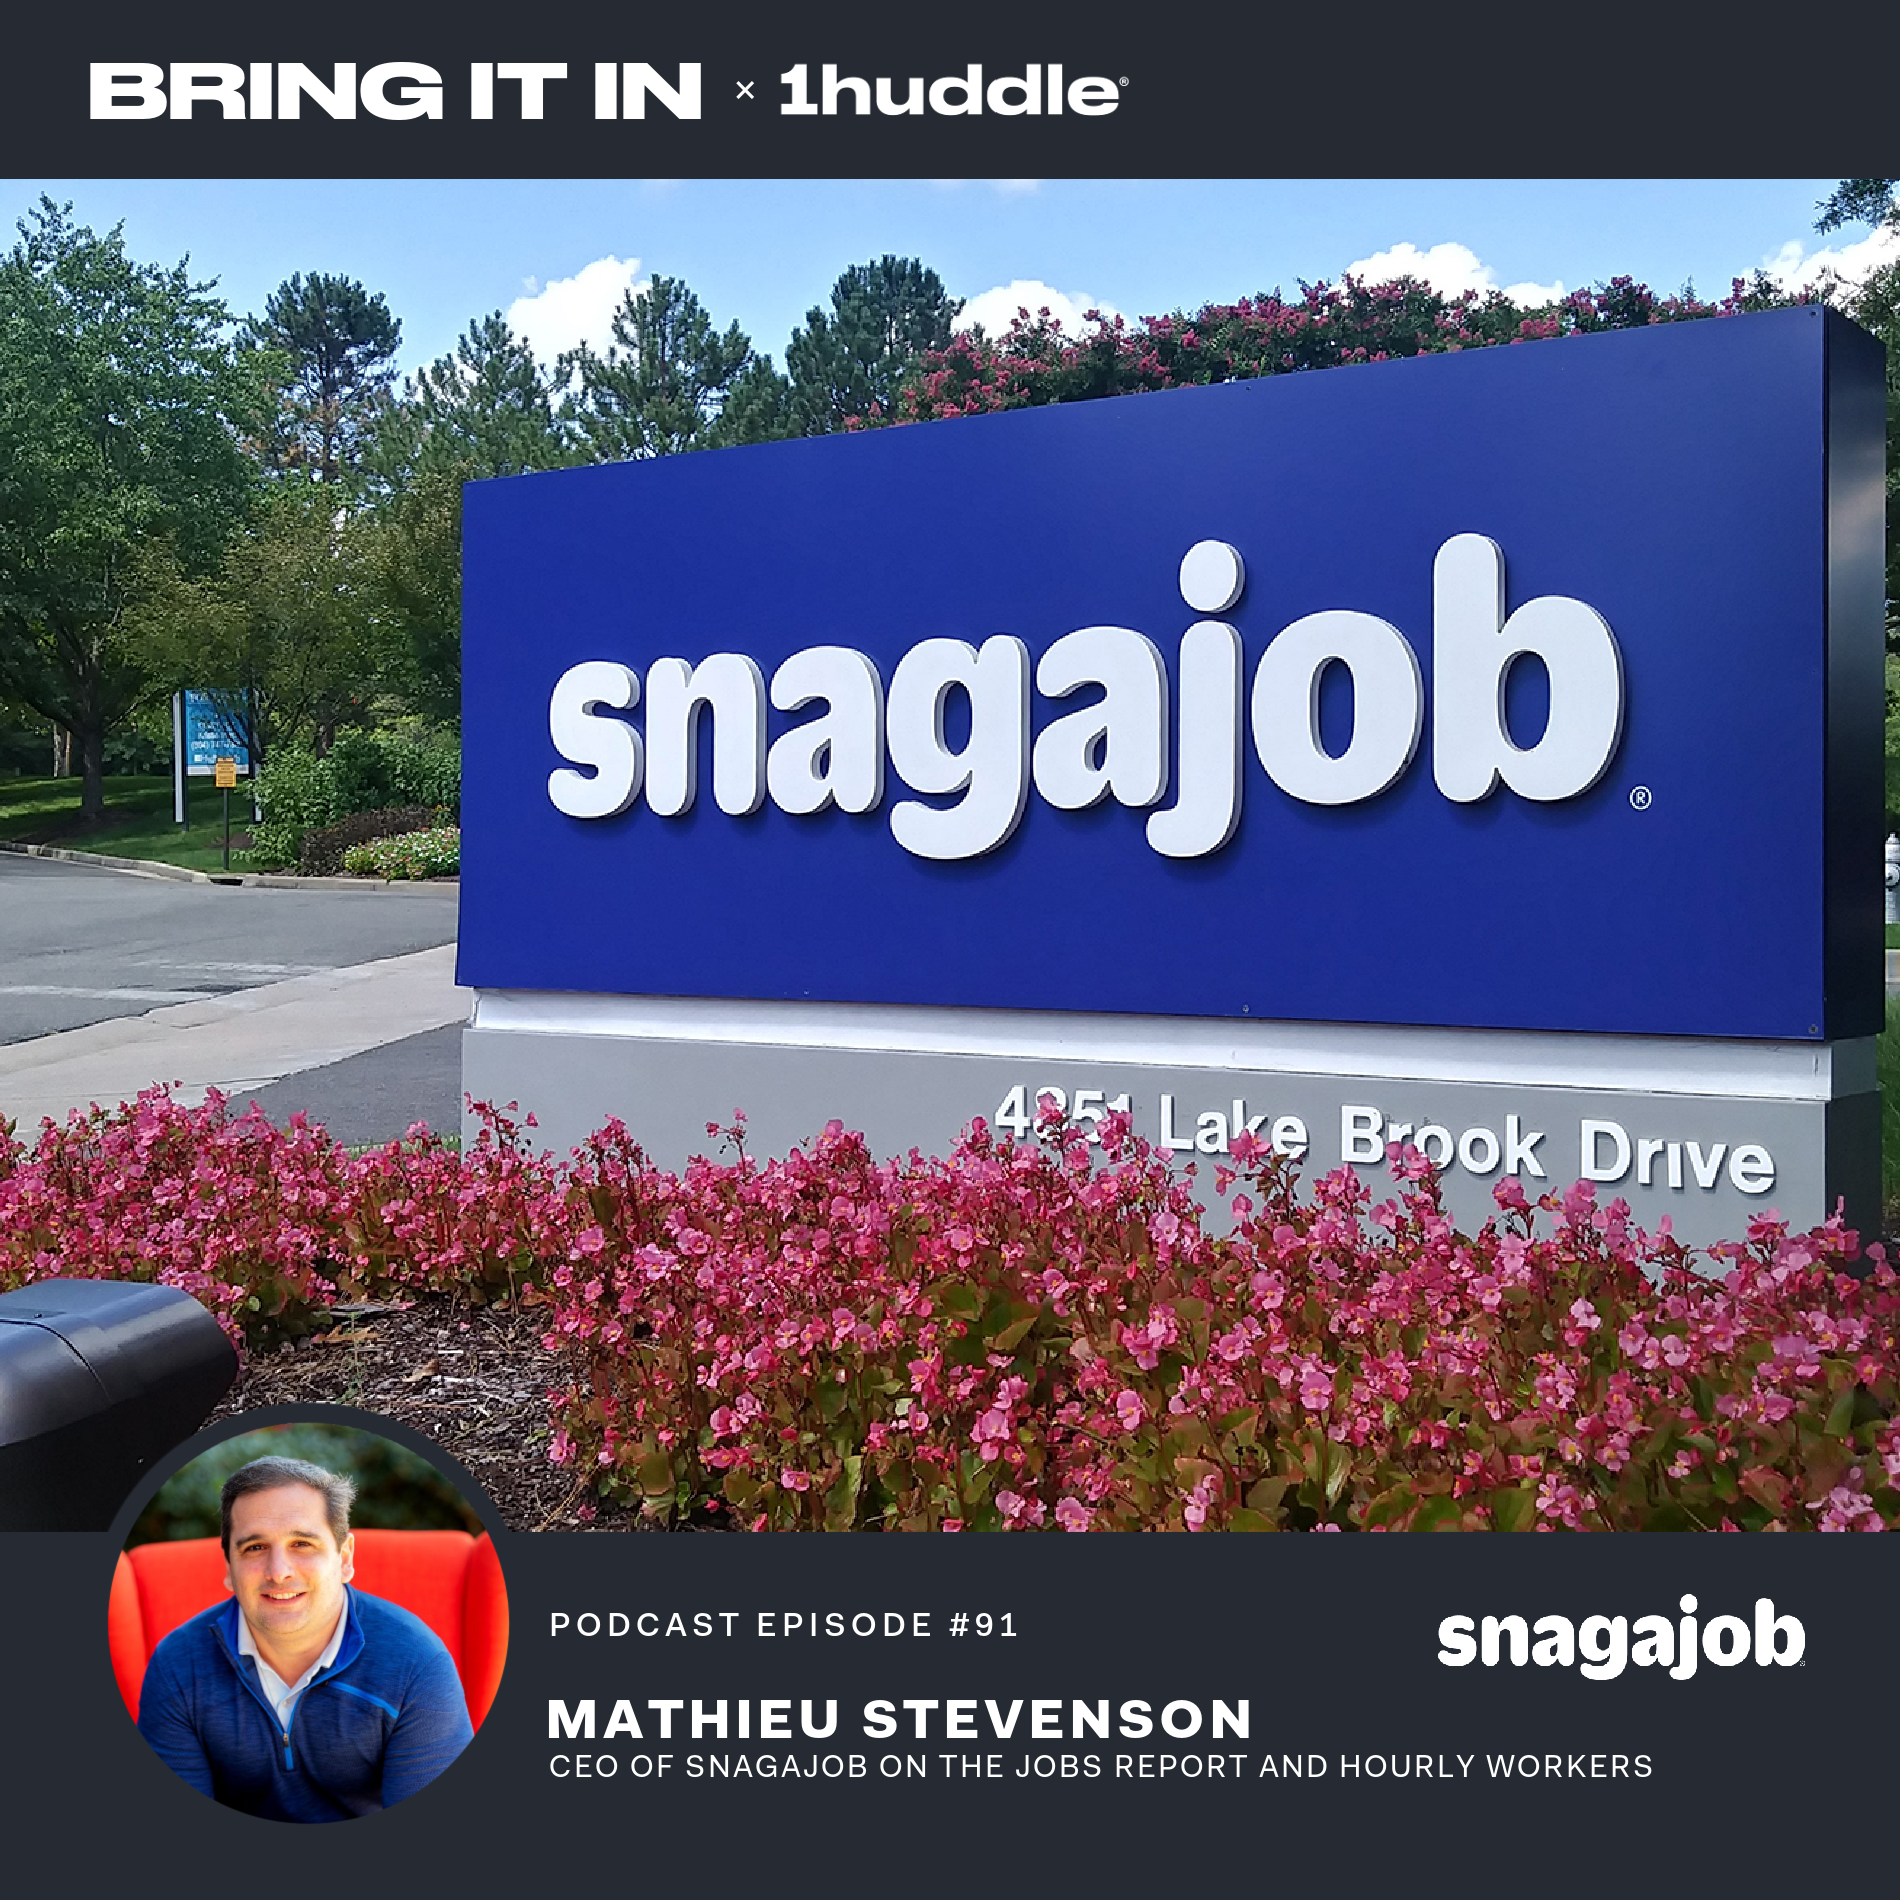 Mathieu Stevenson, CEO of Snagajob on the Jobs Report and Hourly Workers